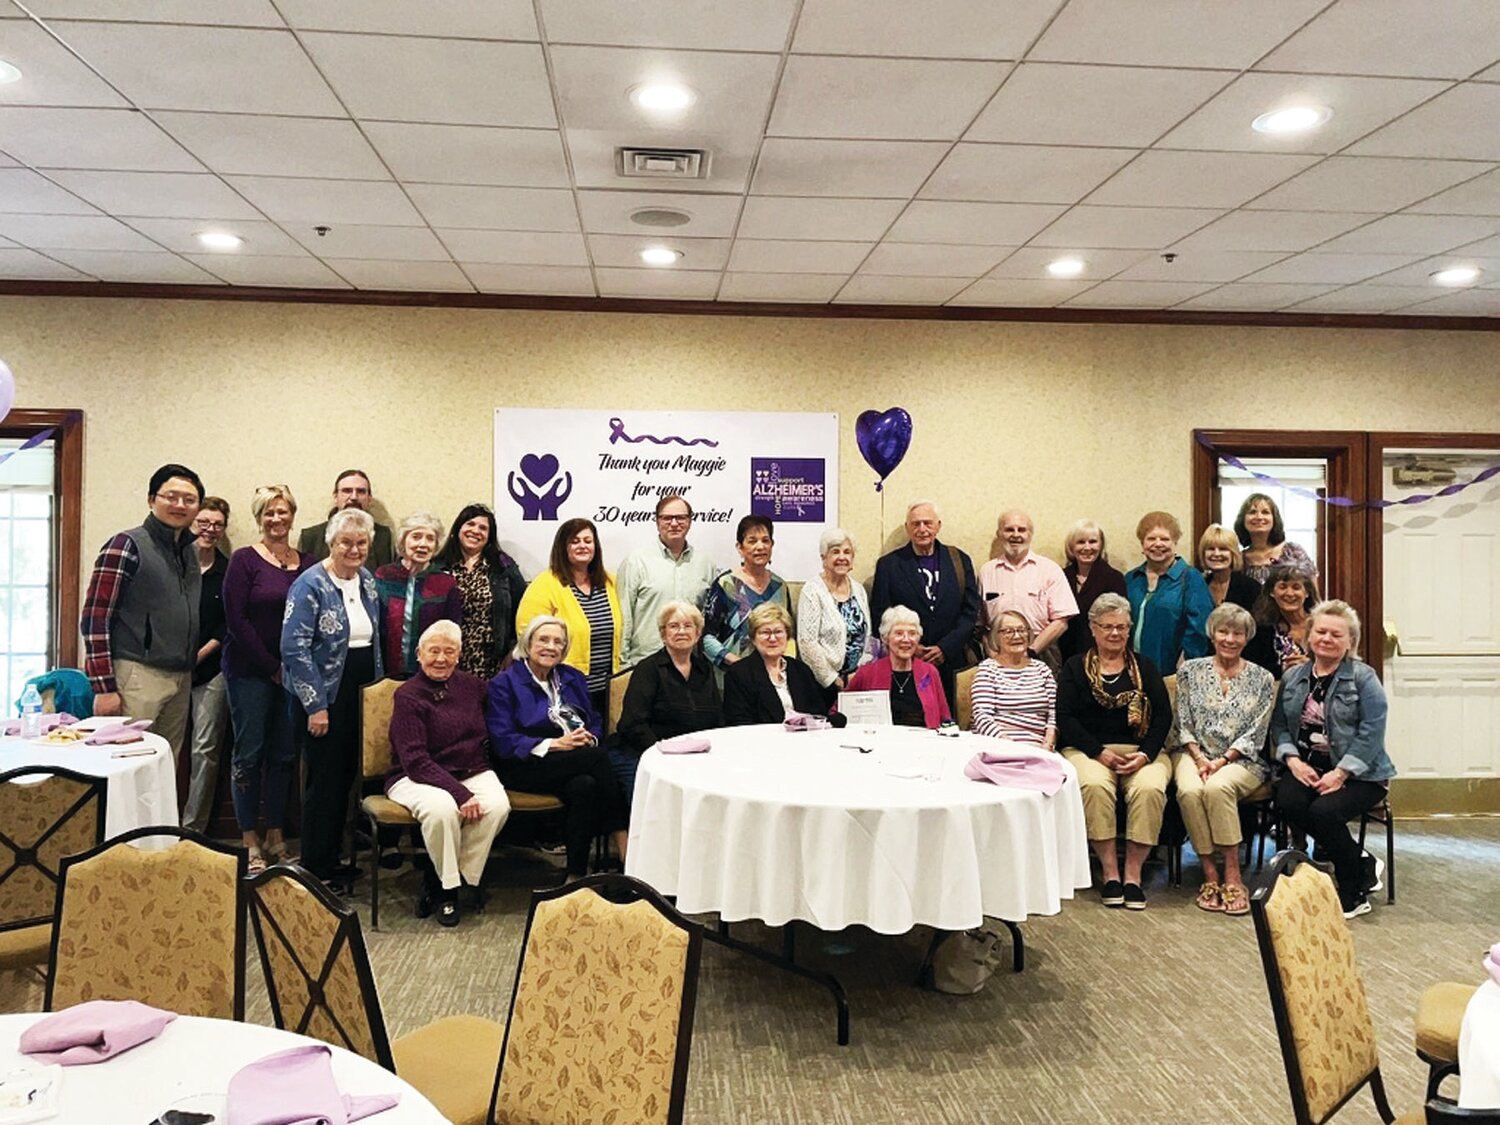 Chandler Hall recently honored Alzheimer’s caregiver support group facilitator Maggie Sullivan with a luncheon attended by current and former support group members.